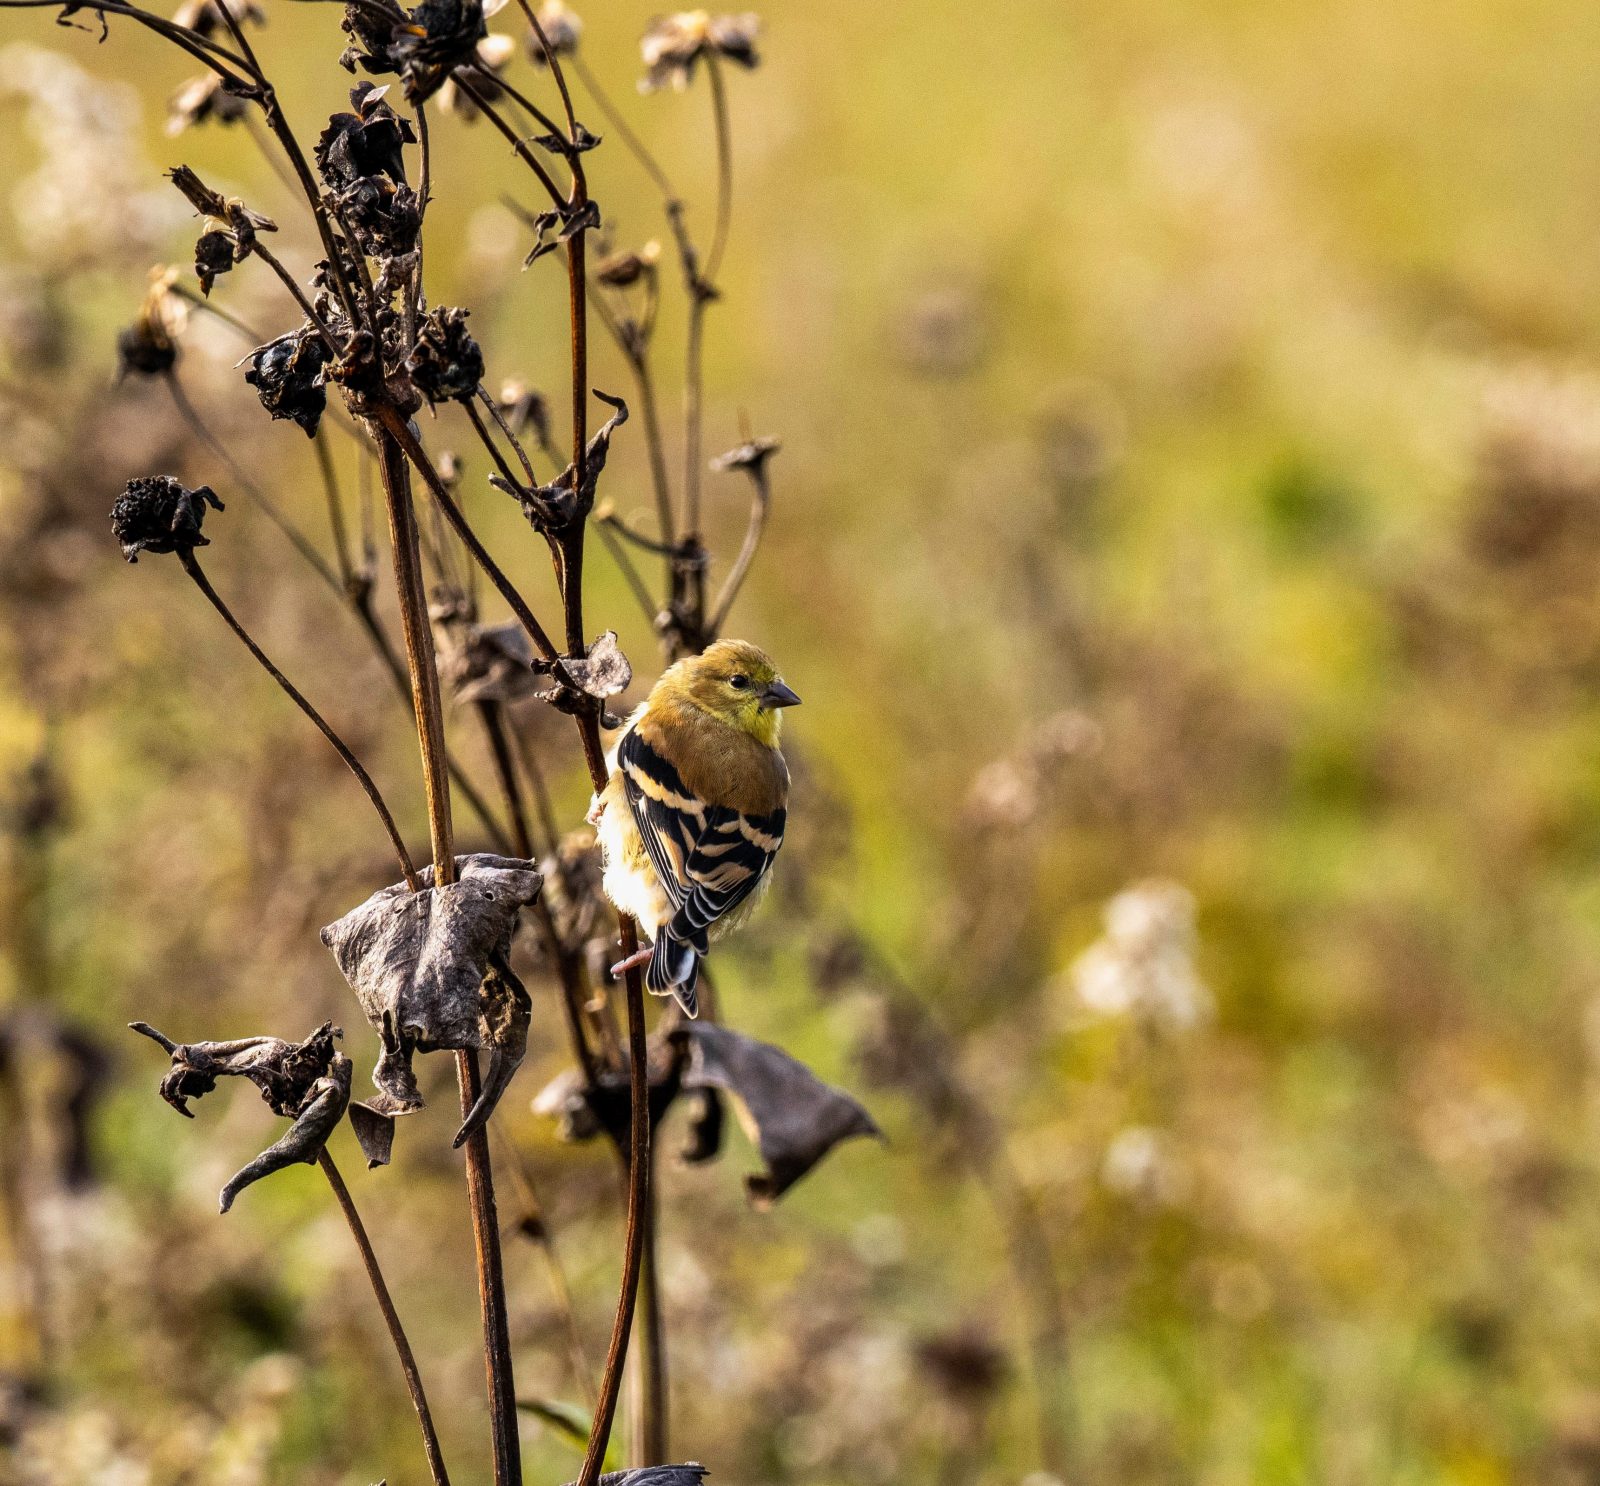 A small bird perched on a plant in a field.